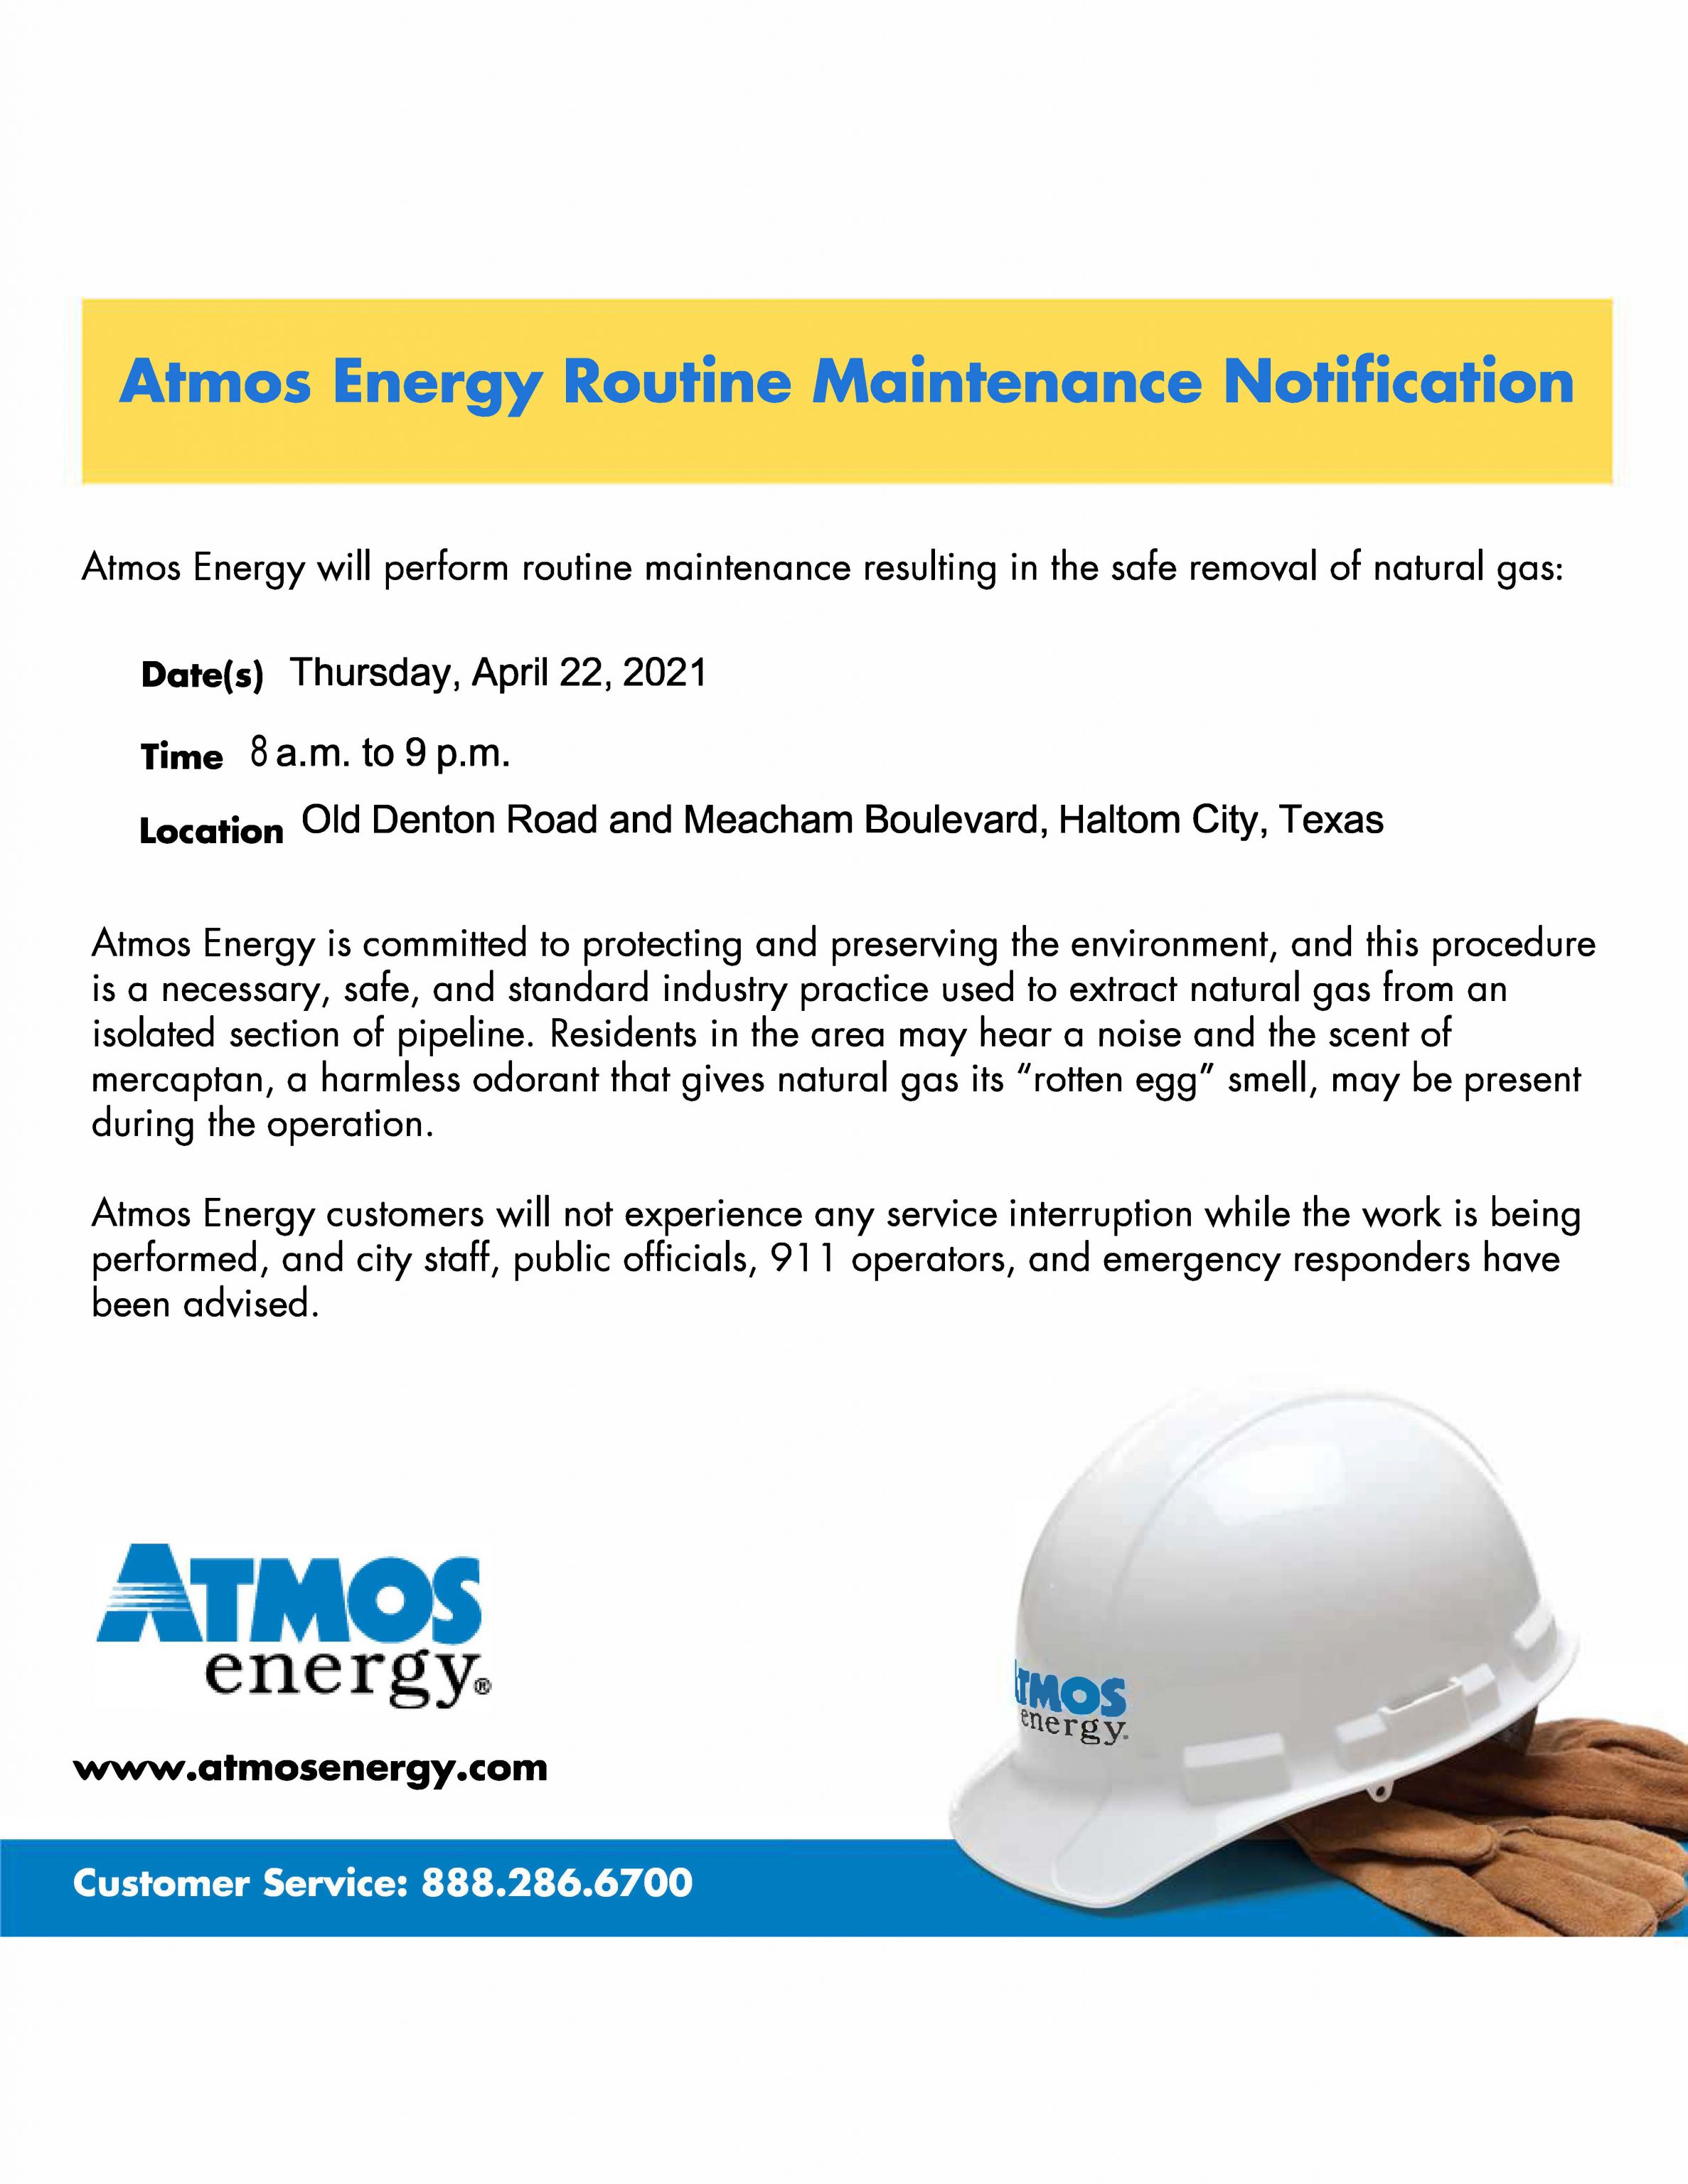 Atmos Energy is committed to protecting and preserving the environment, and this procedure is a necessary, safe, and standard industry practice used to extract natural gas from an isolated section of pipeline. Residents in the area may hear a noise and the scent of mercaptan, a harmless odorant that gives natural gas its "rotten egg" smell, may be present during the operation.  Atmos Energy customers will not experience any service interruption while the work is being performed, and city staff, public officials, 911 operators, and emergency responders have been advised. 